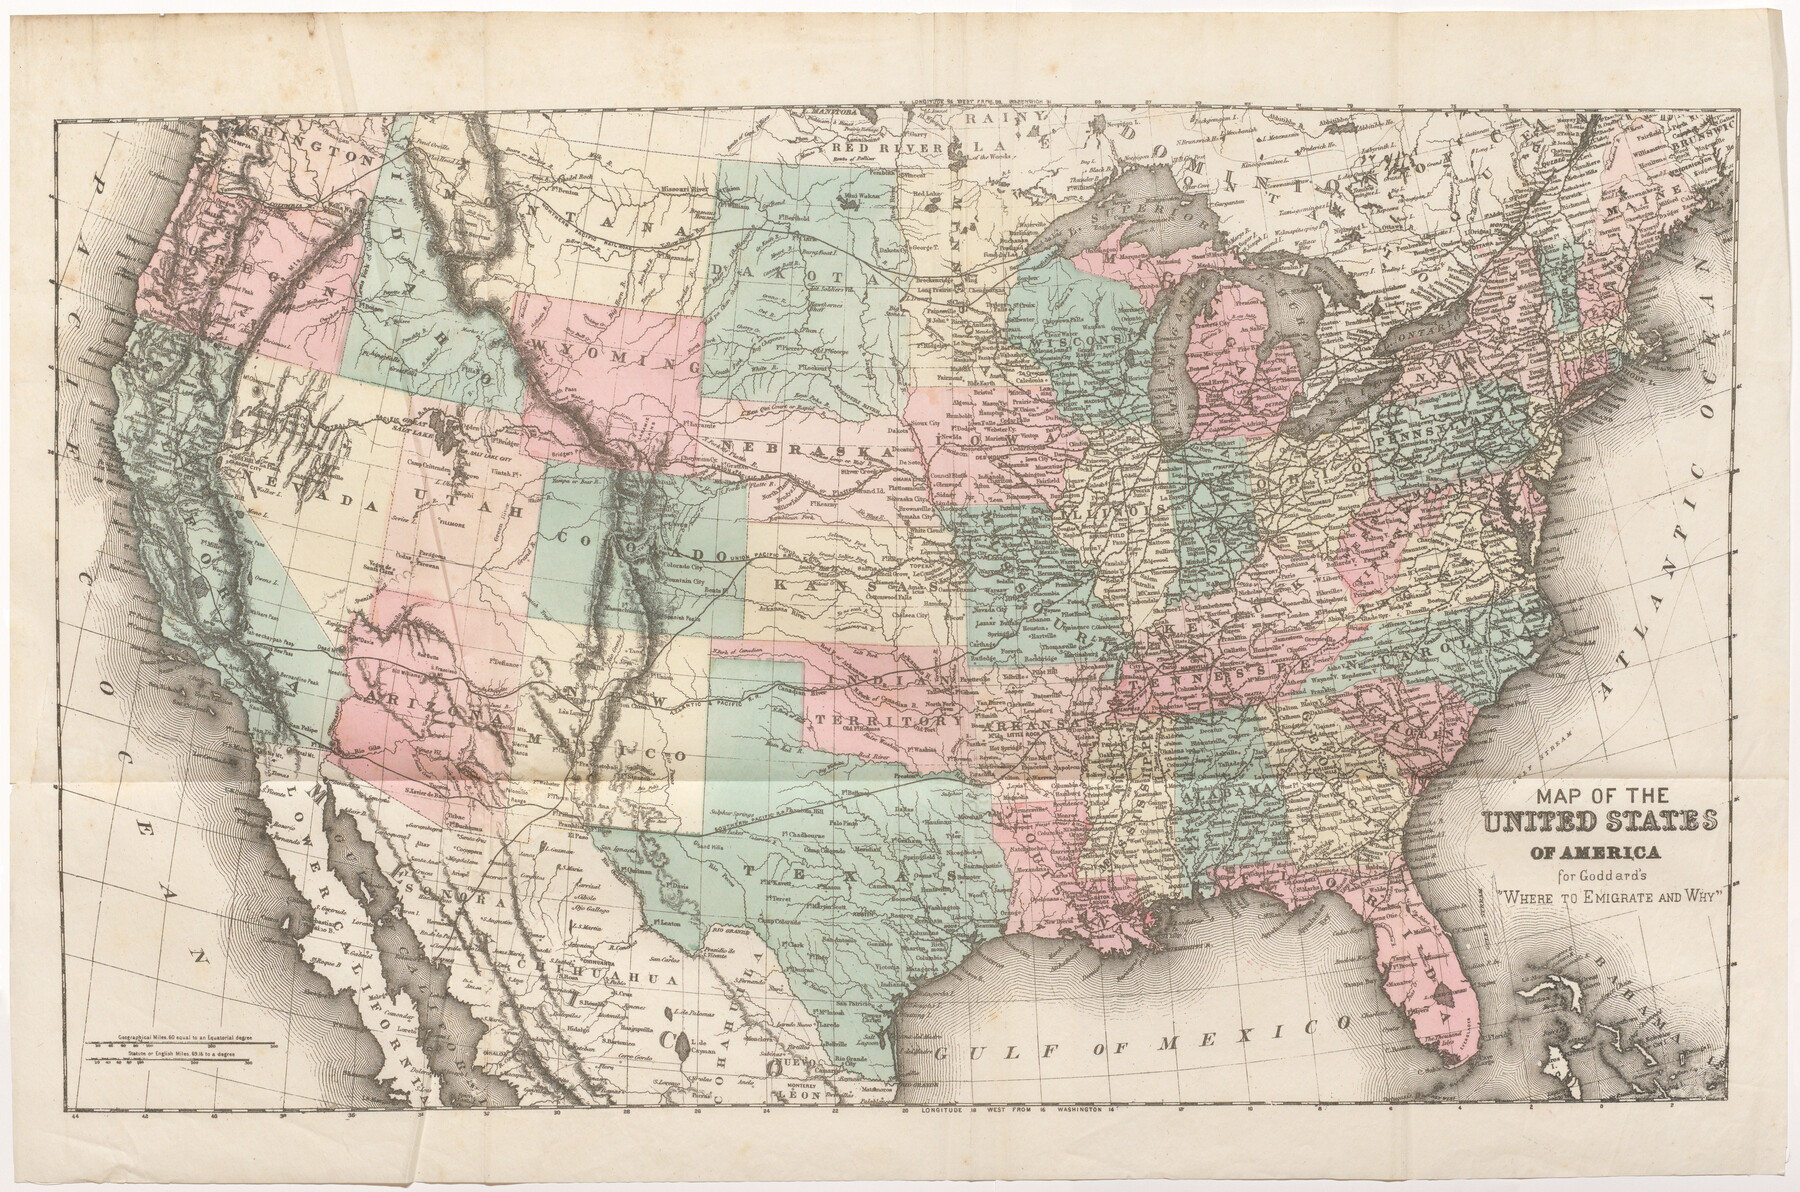 96619, Map of the United States of America for Goddard's "Where to Emigrate and Why", Cobb Digital Map Collection